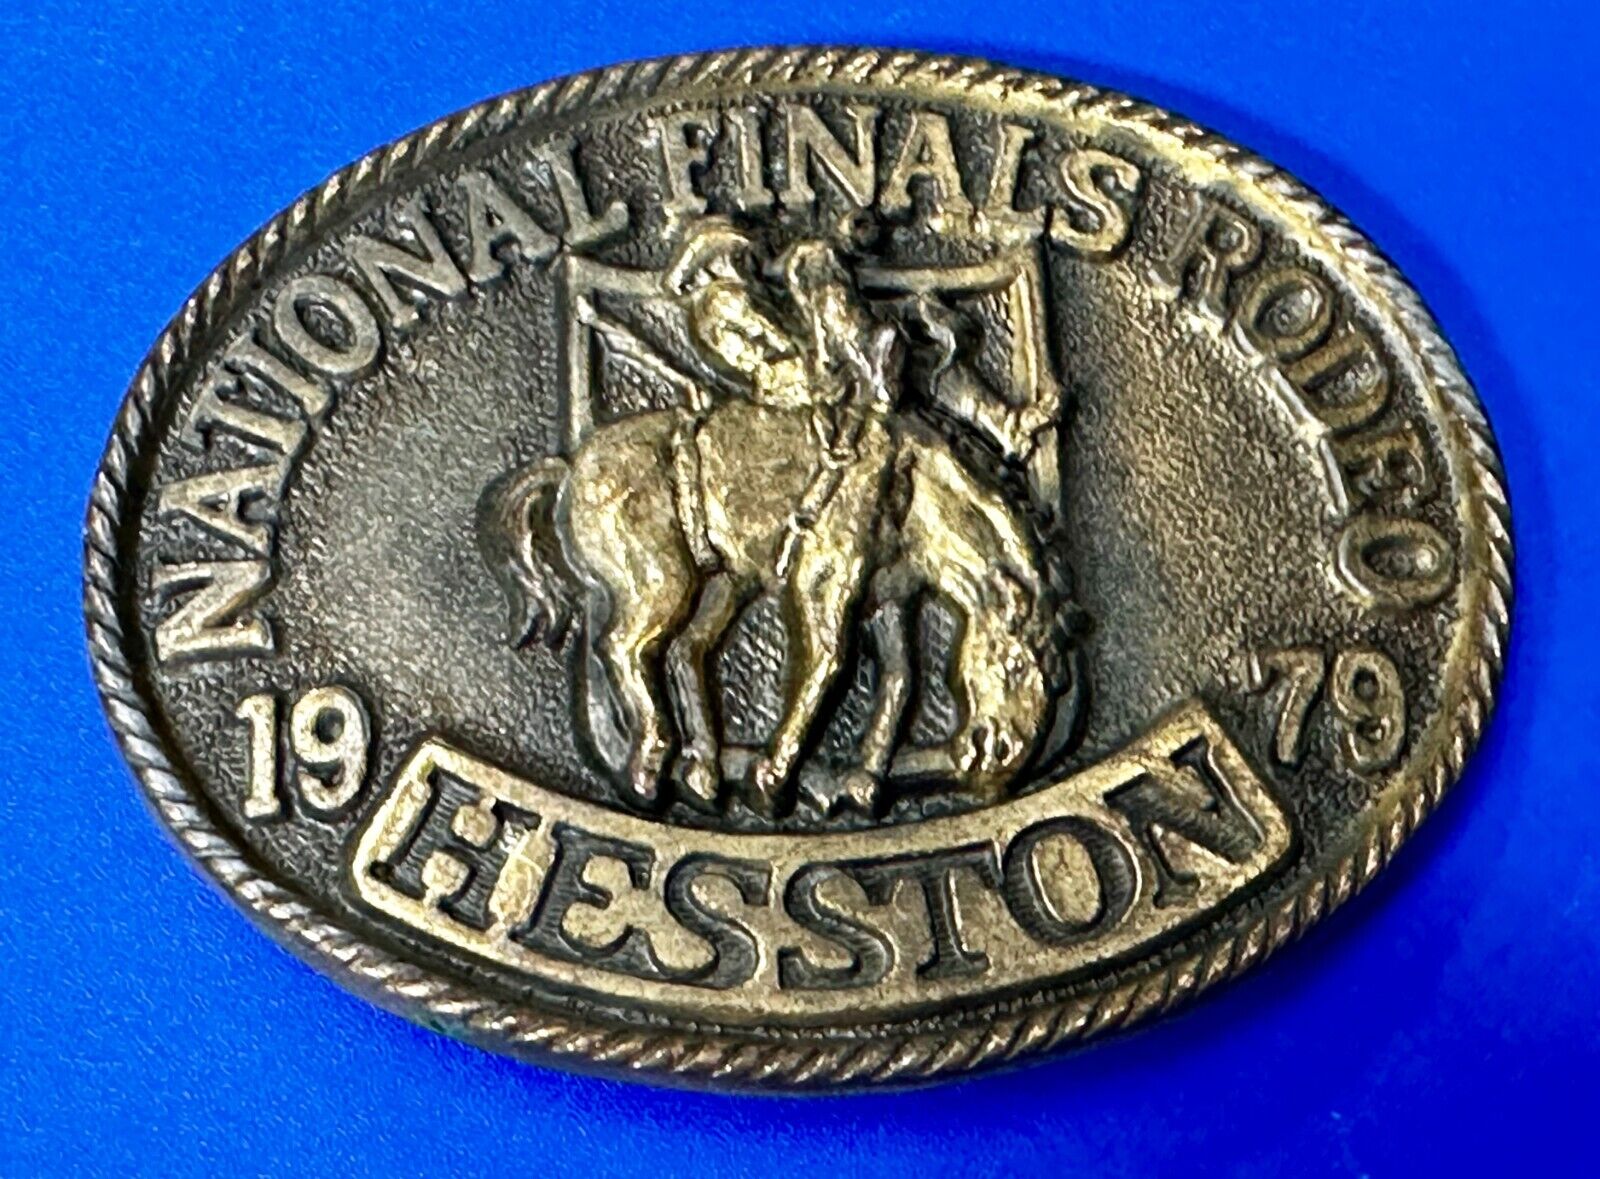 1979 NFR National Finals Rodeo Hesston Fifth Edition Commemorative Belt Buckle